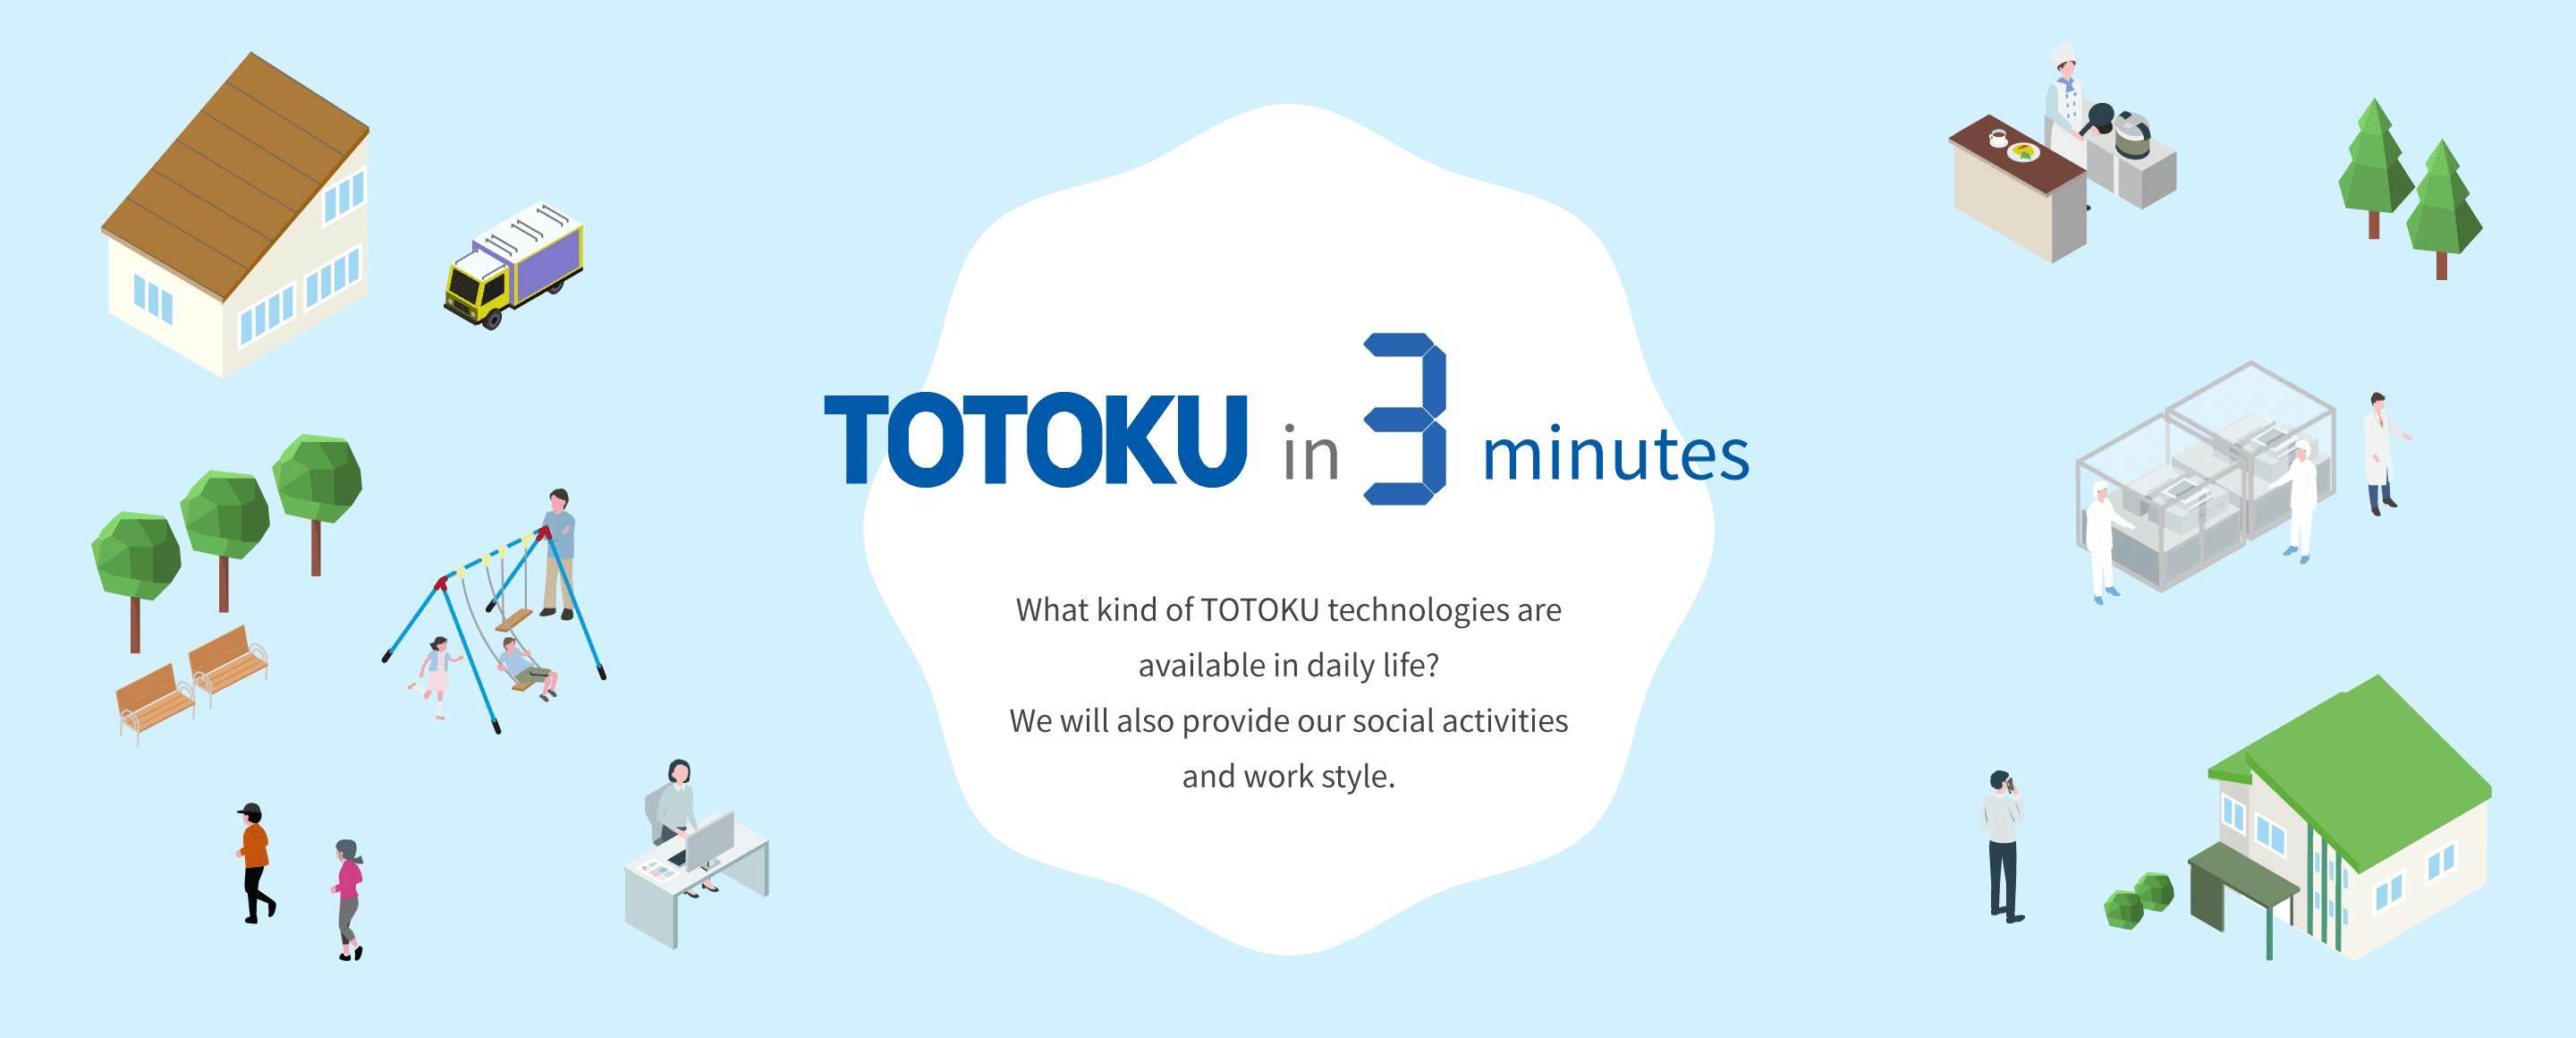 Main image: TOTOKU in 3 minutes